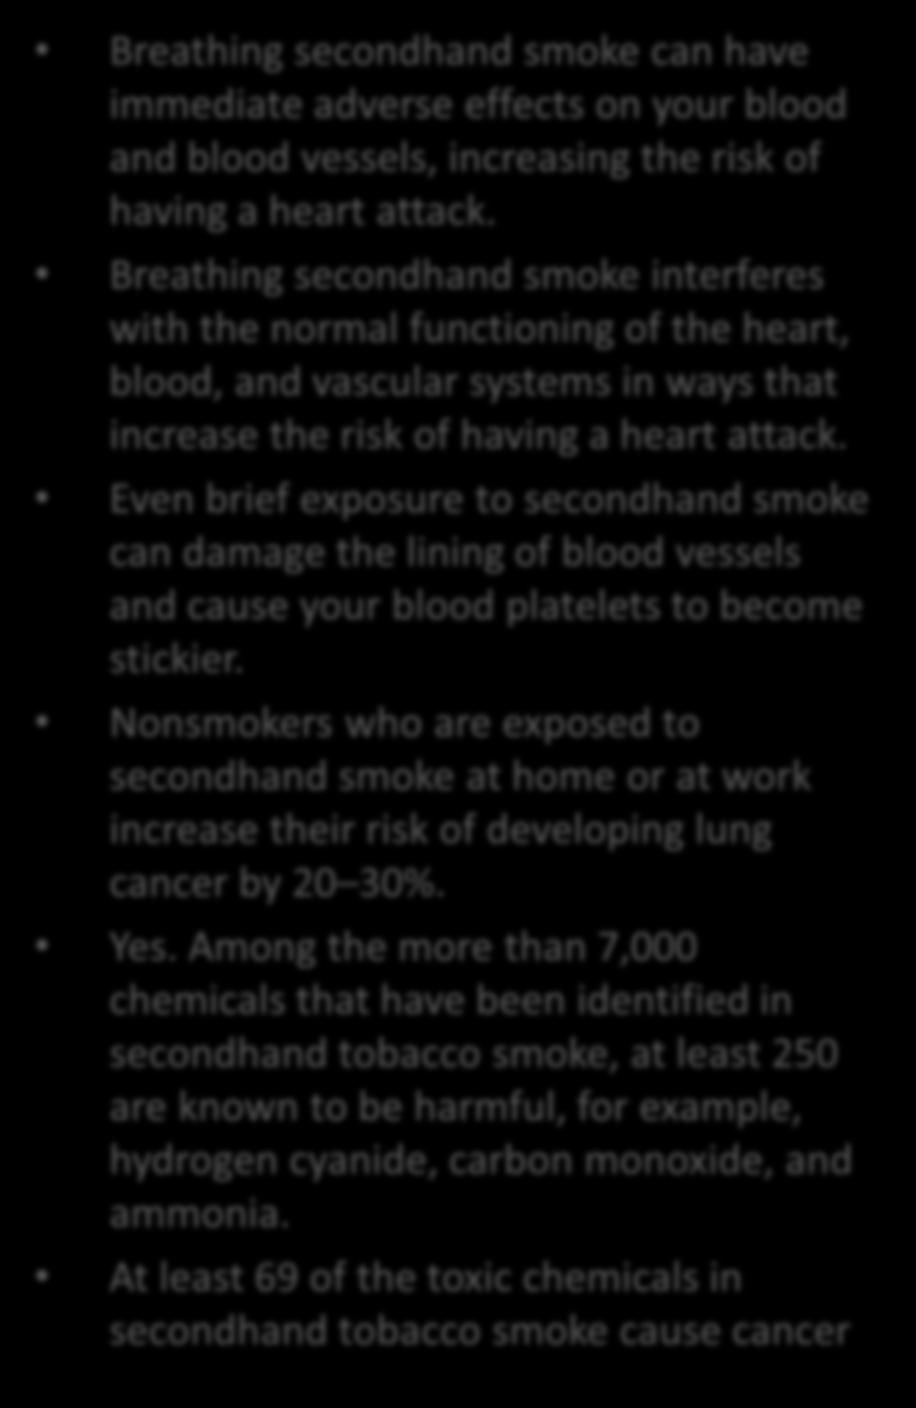 Secondhand Smoke Effects Breathing secondhand smoke can have immediate adverse effects on your blood and blood vessels, increasing the risk of